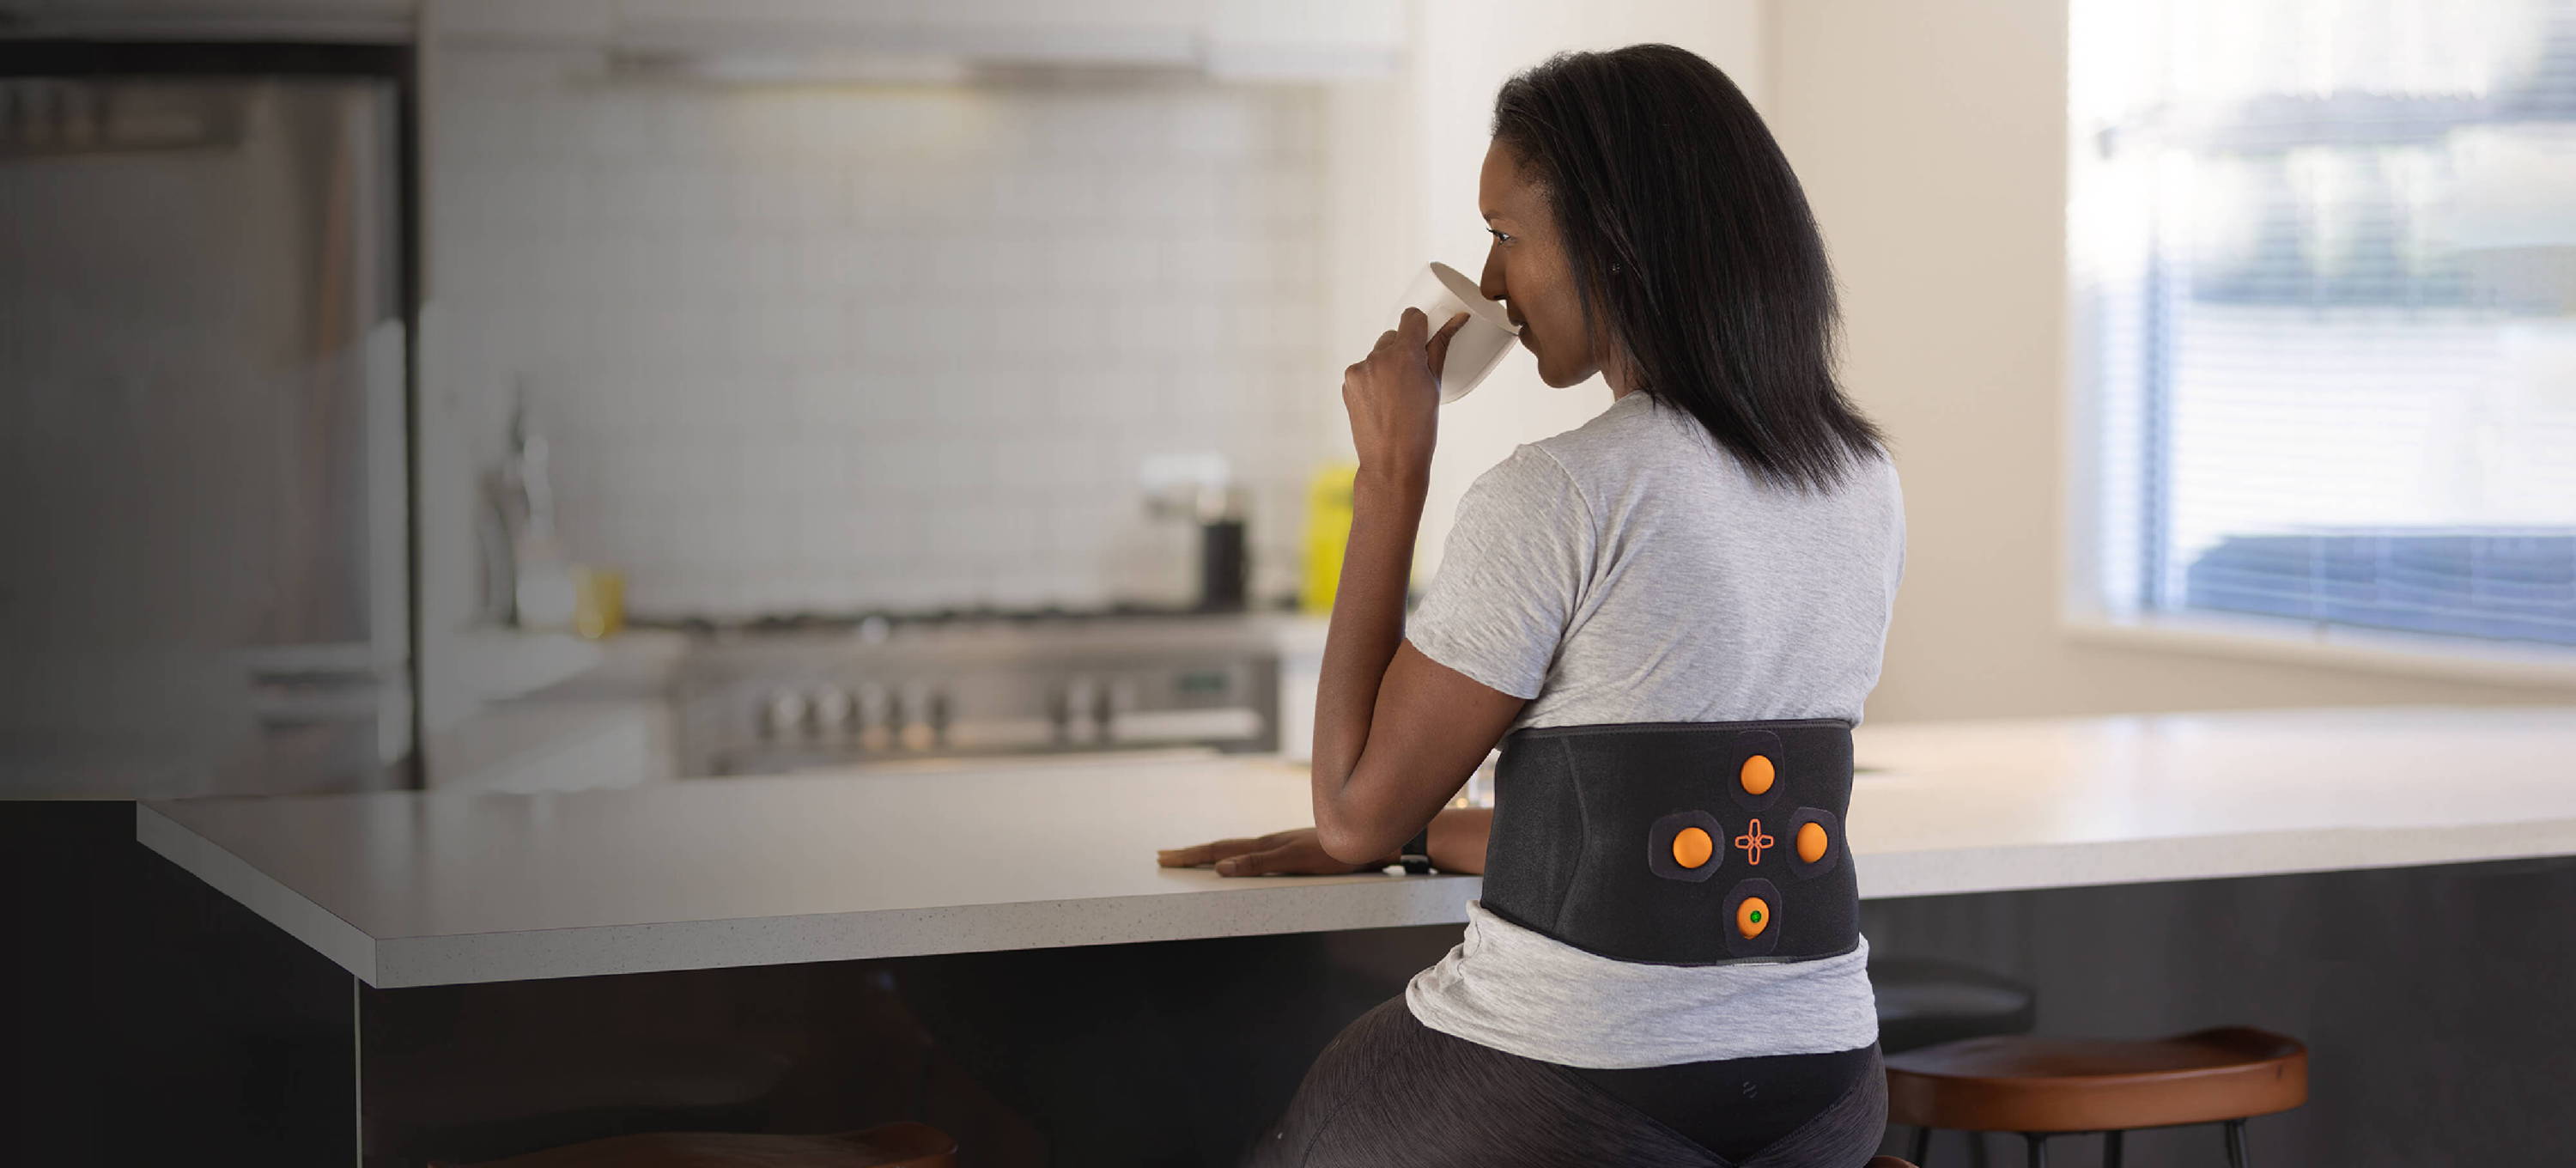 Myovolt vibration therapy back brace for lower back pain relief and treatment of back muscle strain, stiffness or overuse injury from sport or occupation.